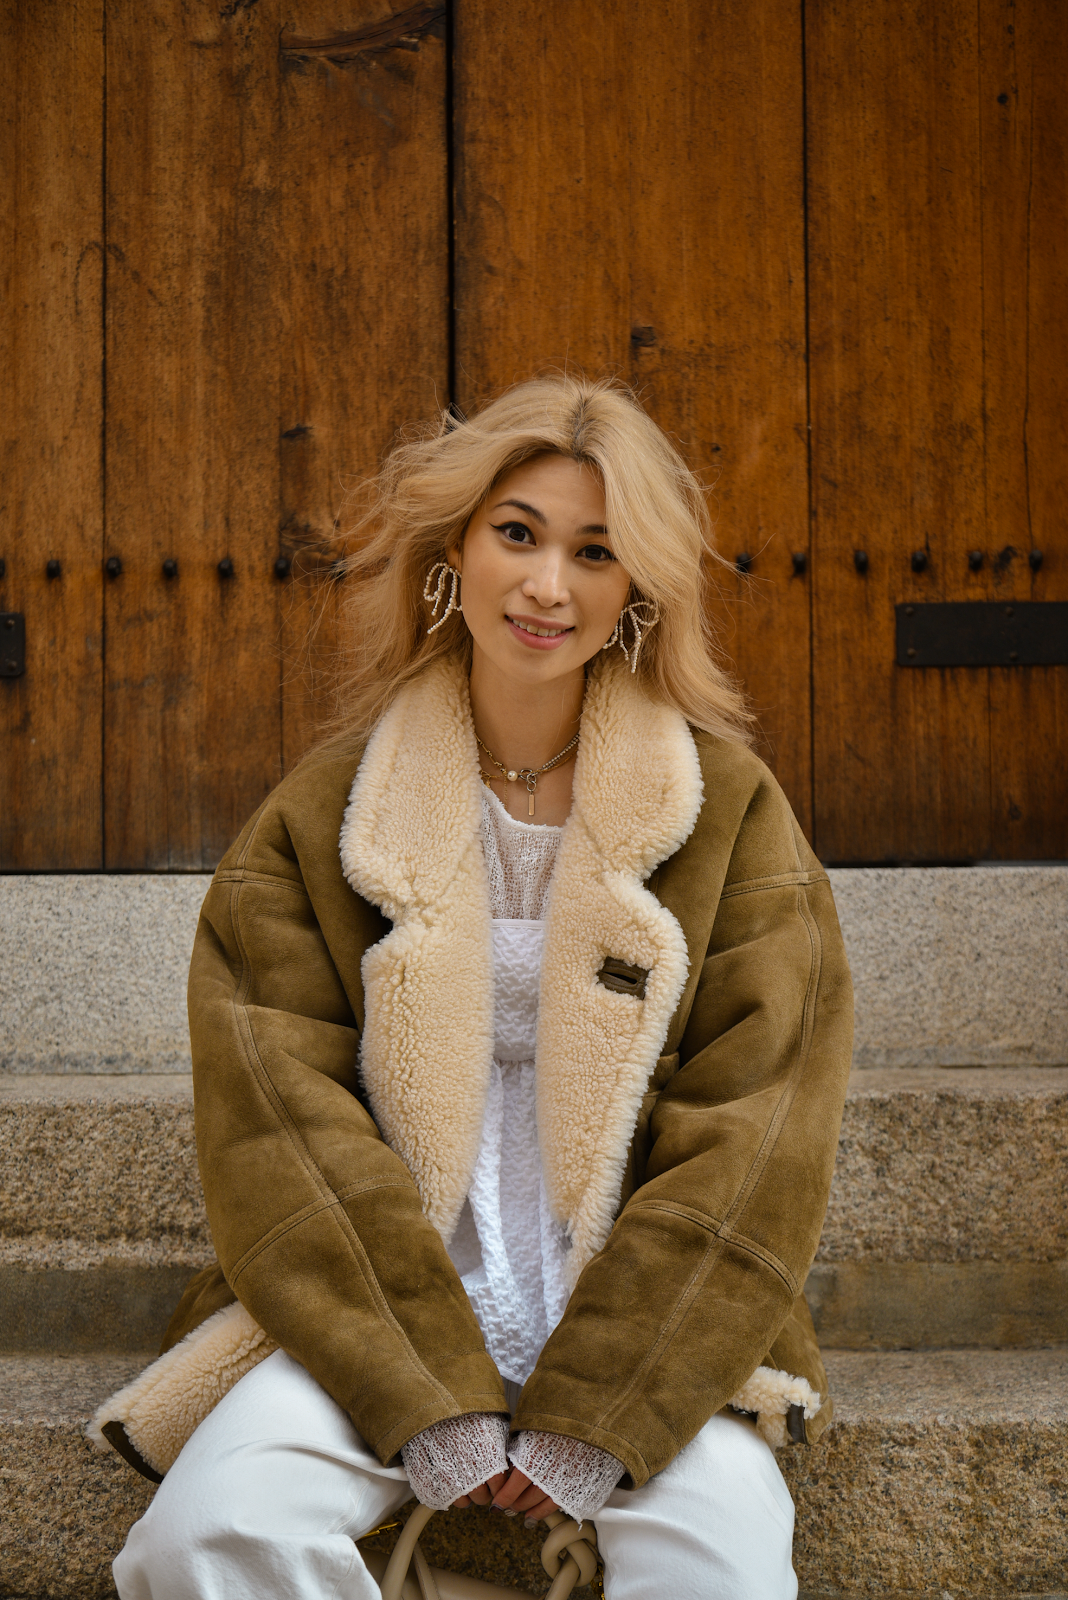 Shearling winter coat, neutral shearling coat outfits, beige monochrome winter outfits - FOREVERVANNY.com